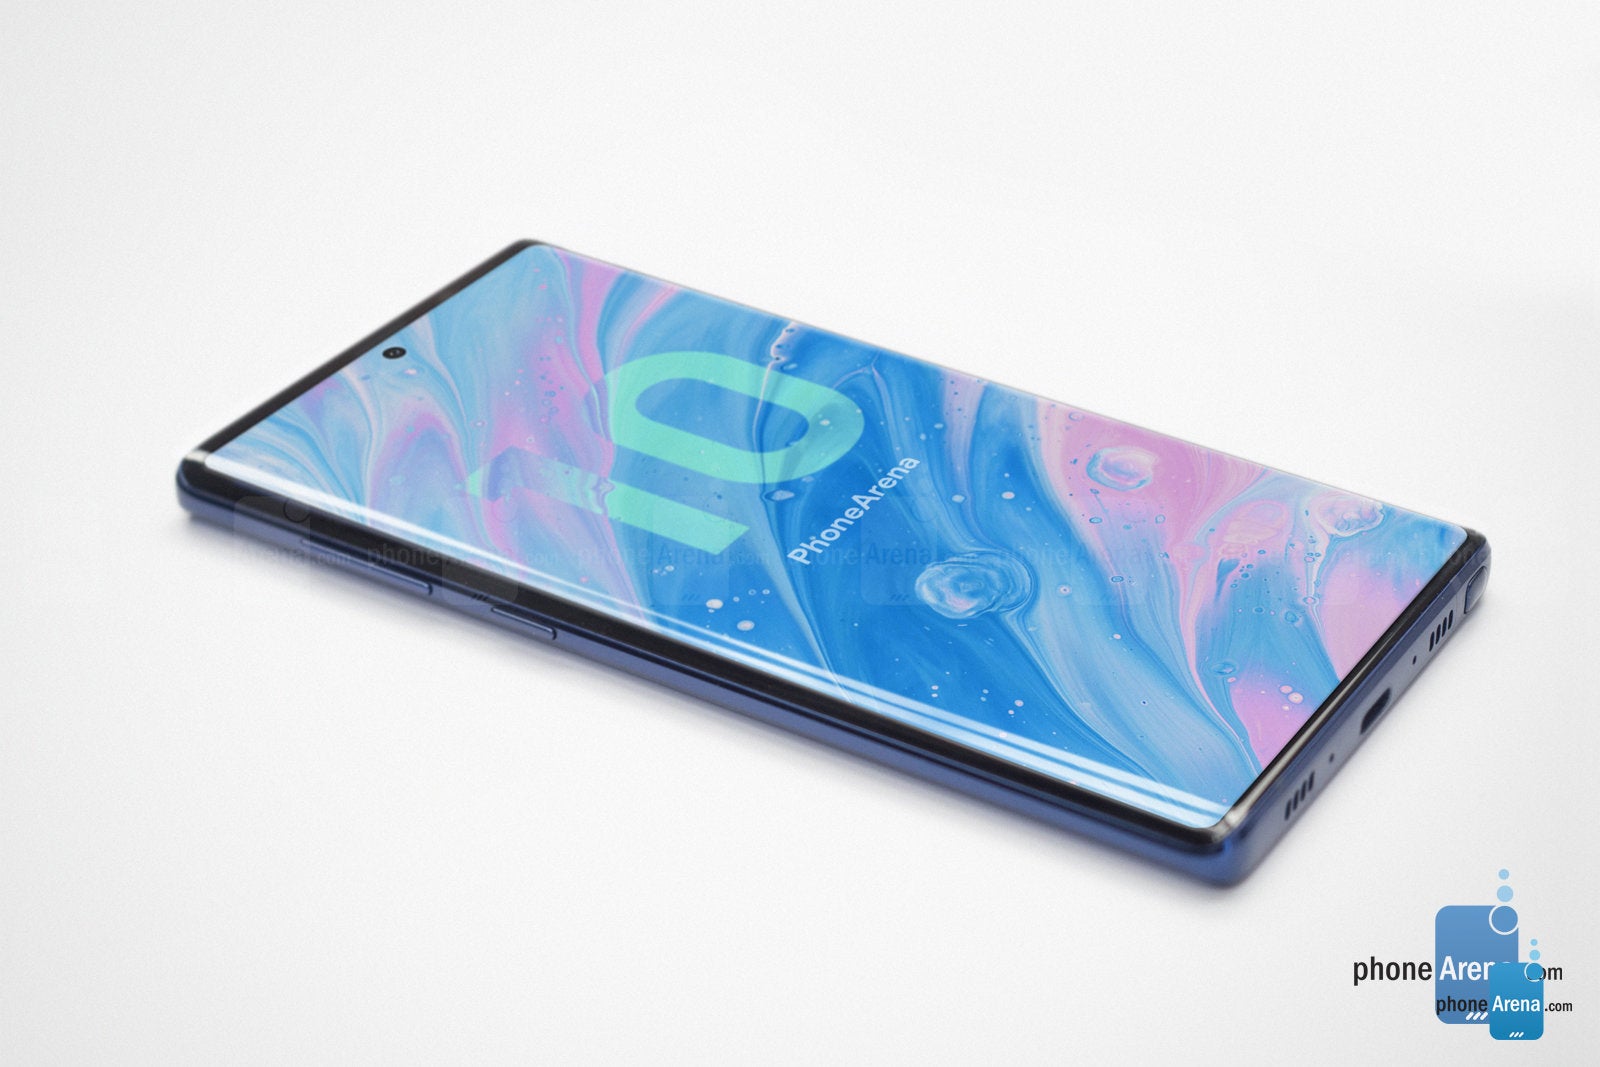 Galaxy Note 10 concept image - Galaxy Note 10 price and release date expectations: in-depth analysis